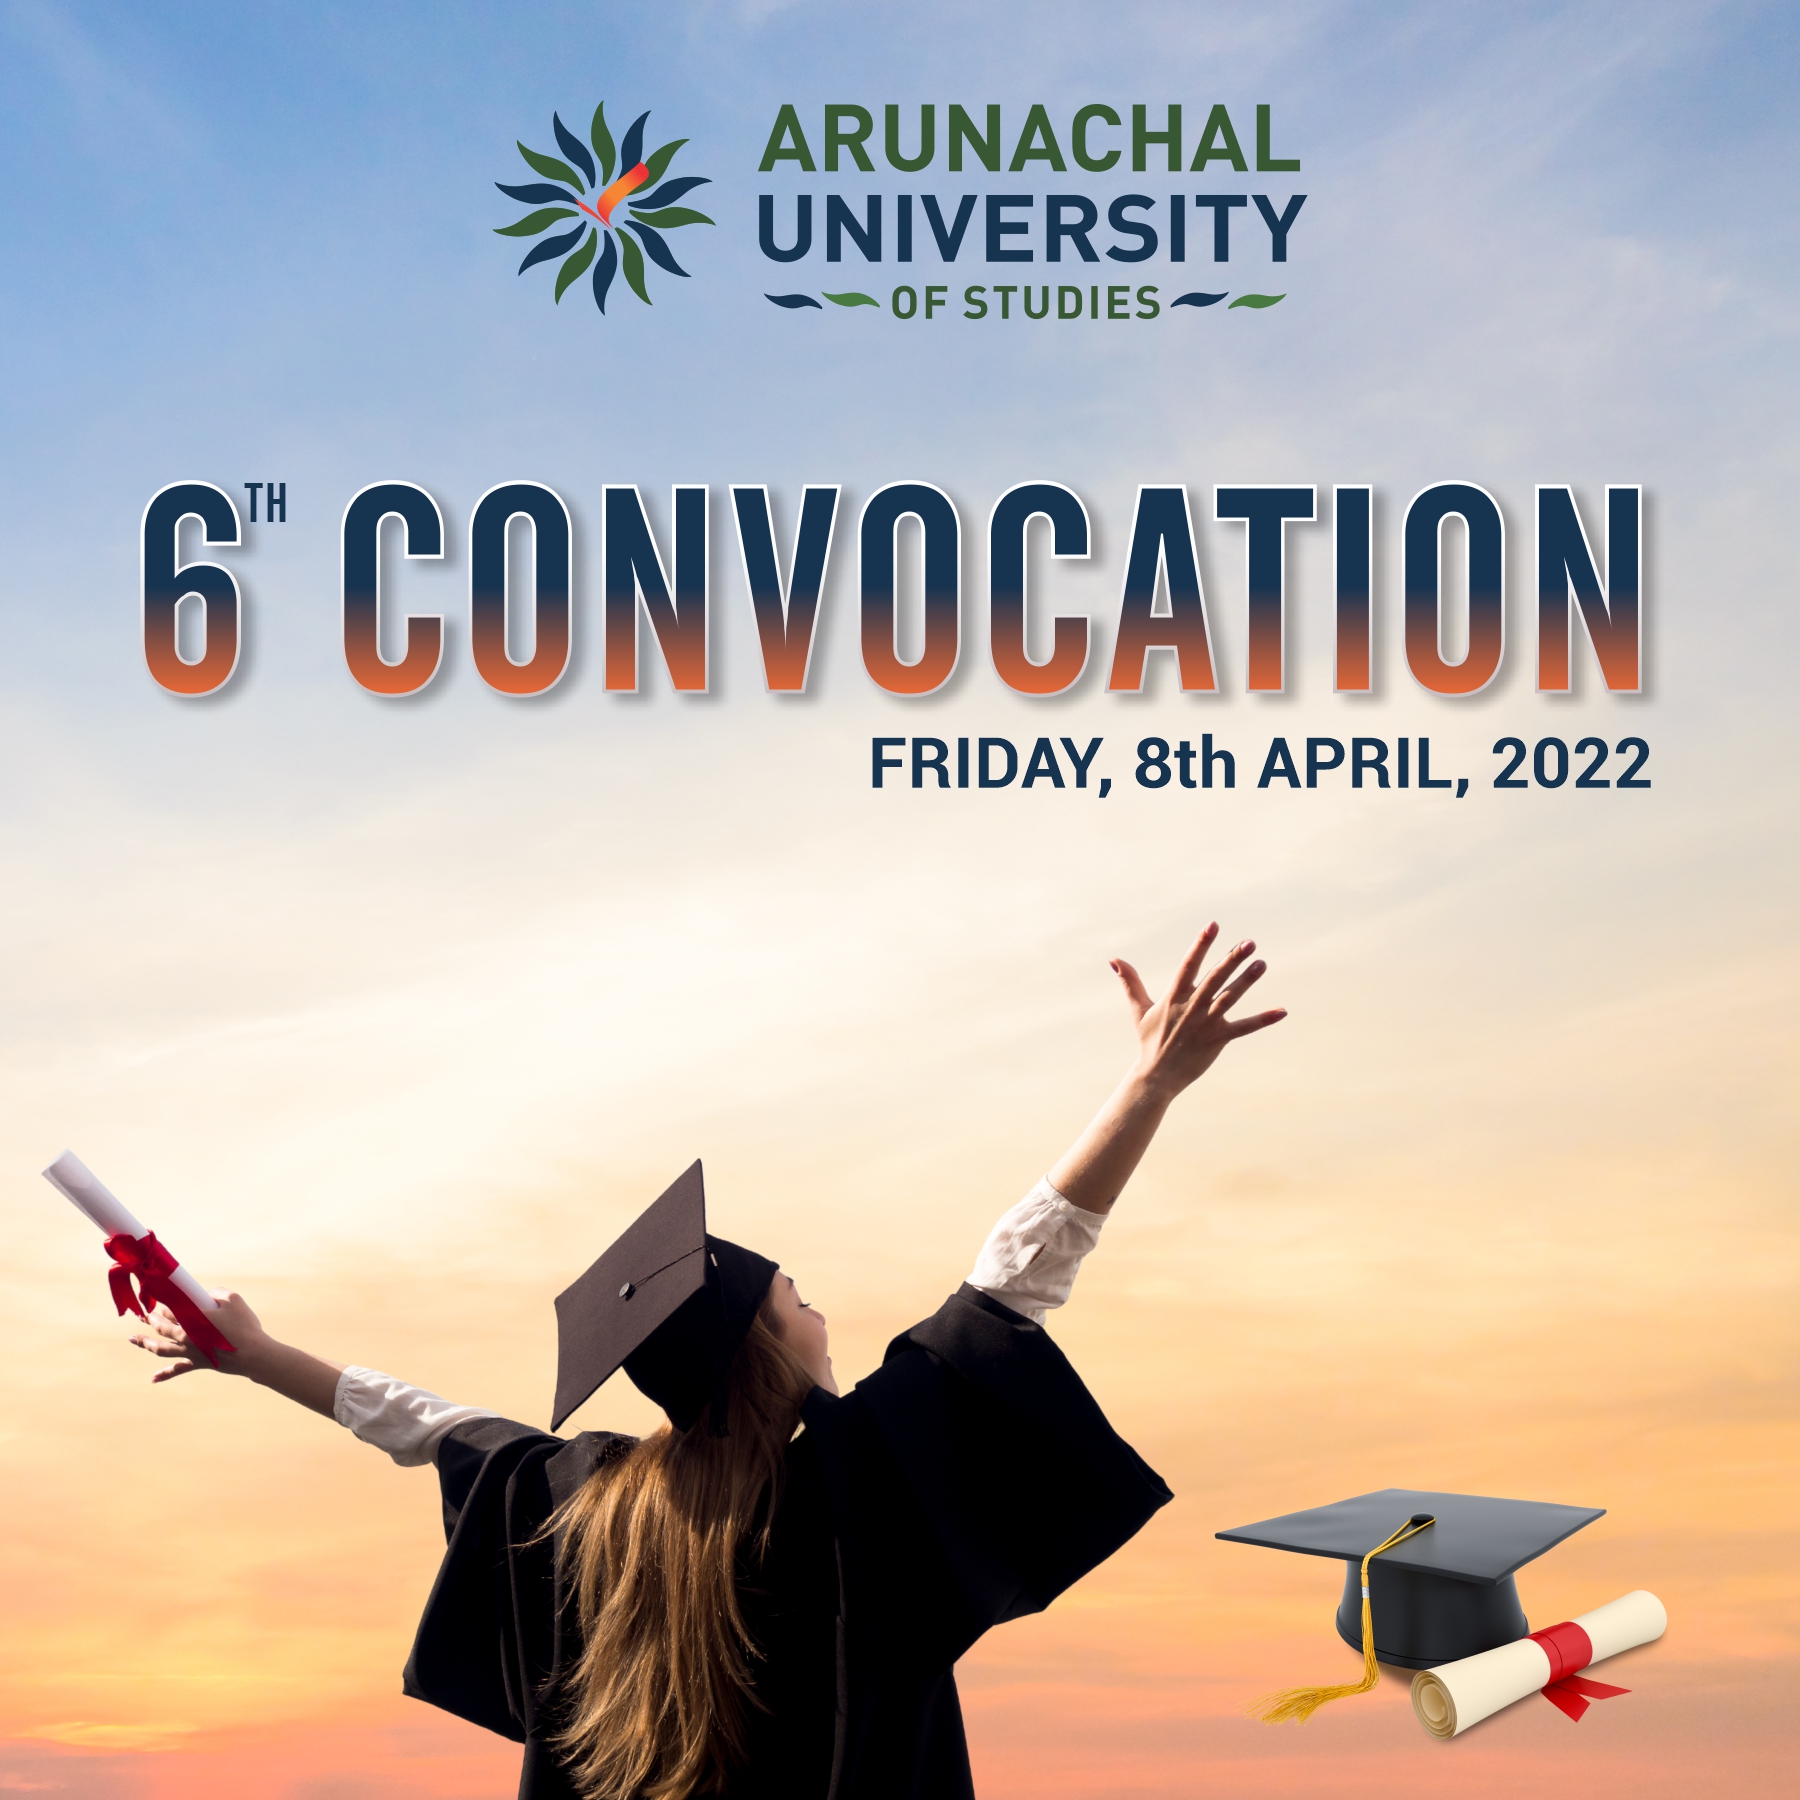  6th convocation on 8th April 2022 